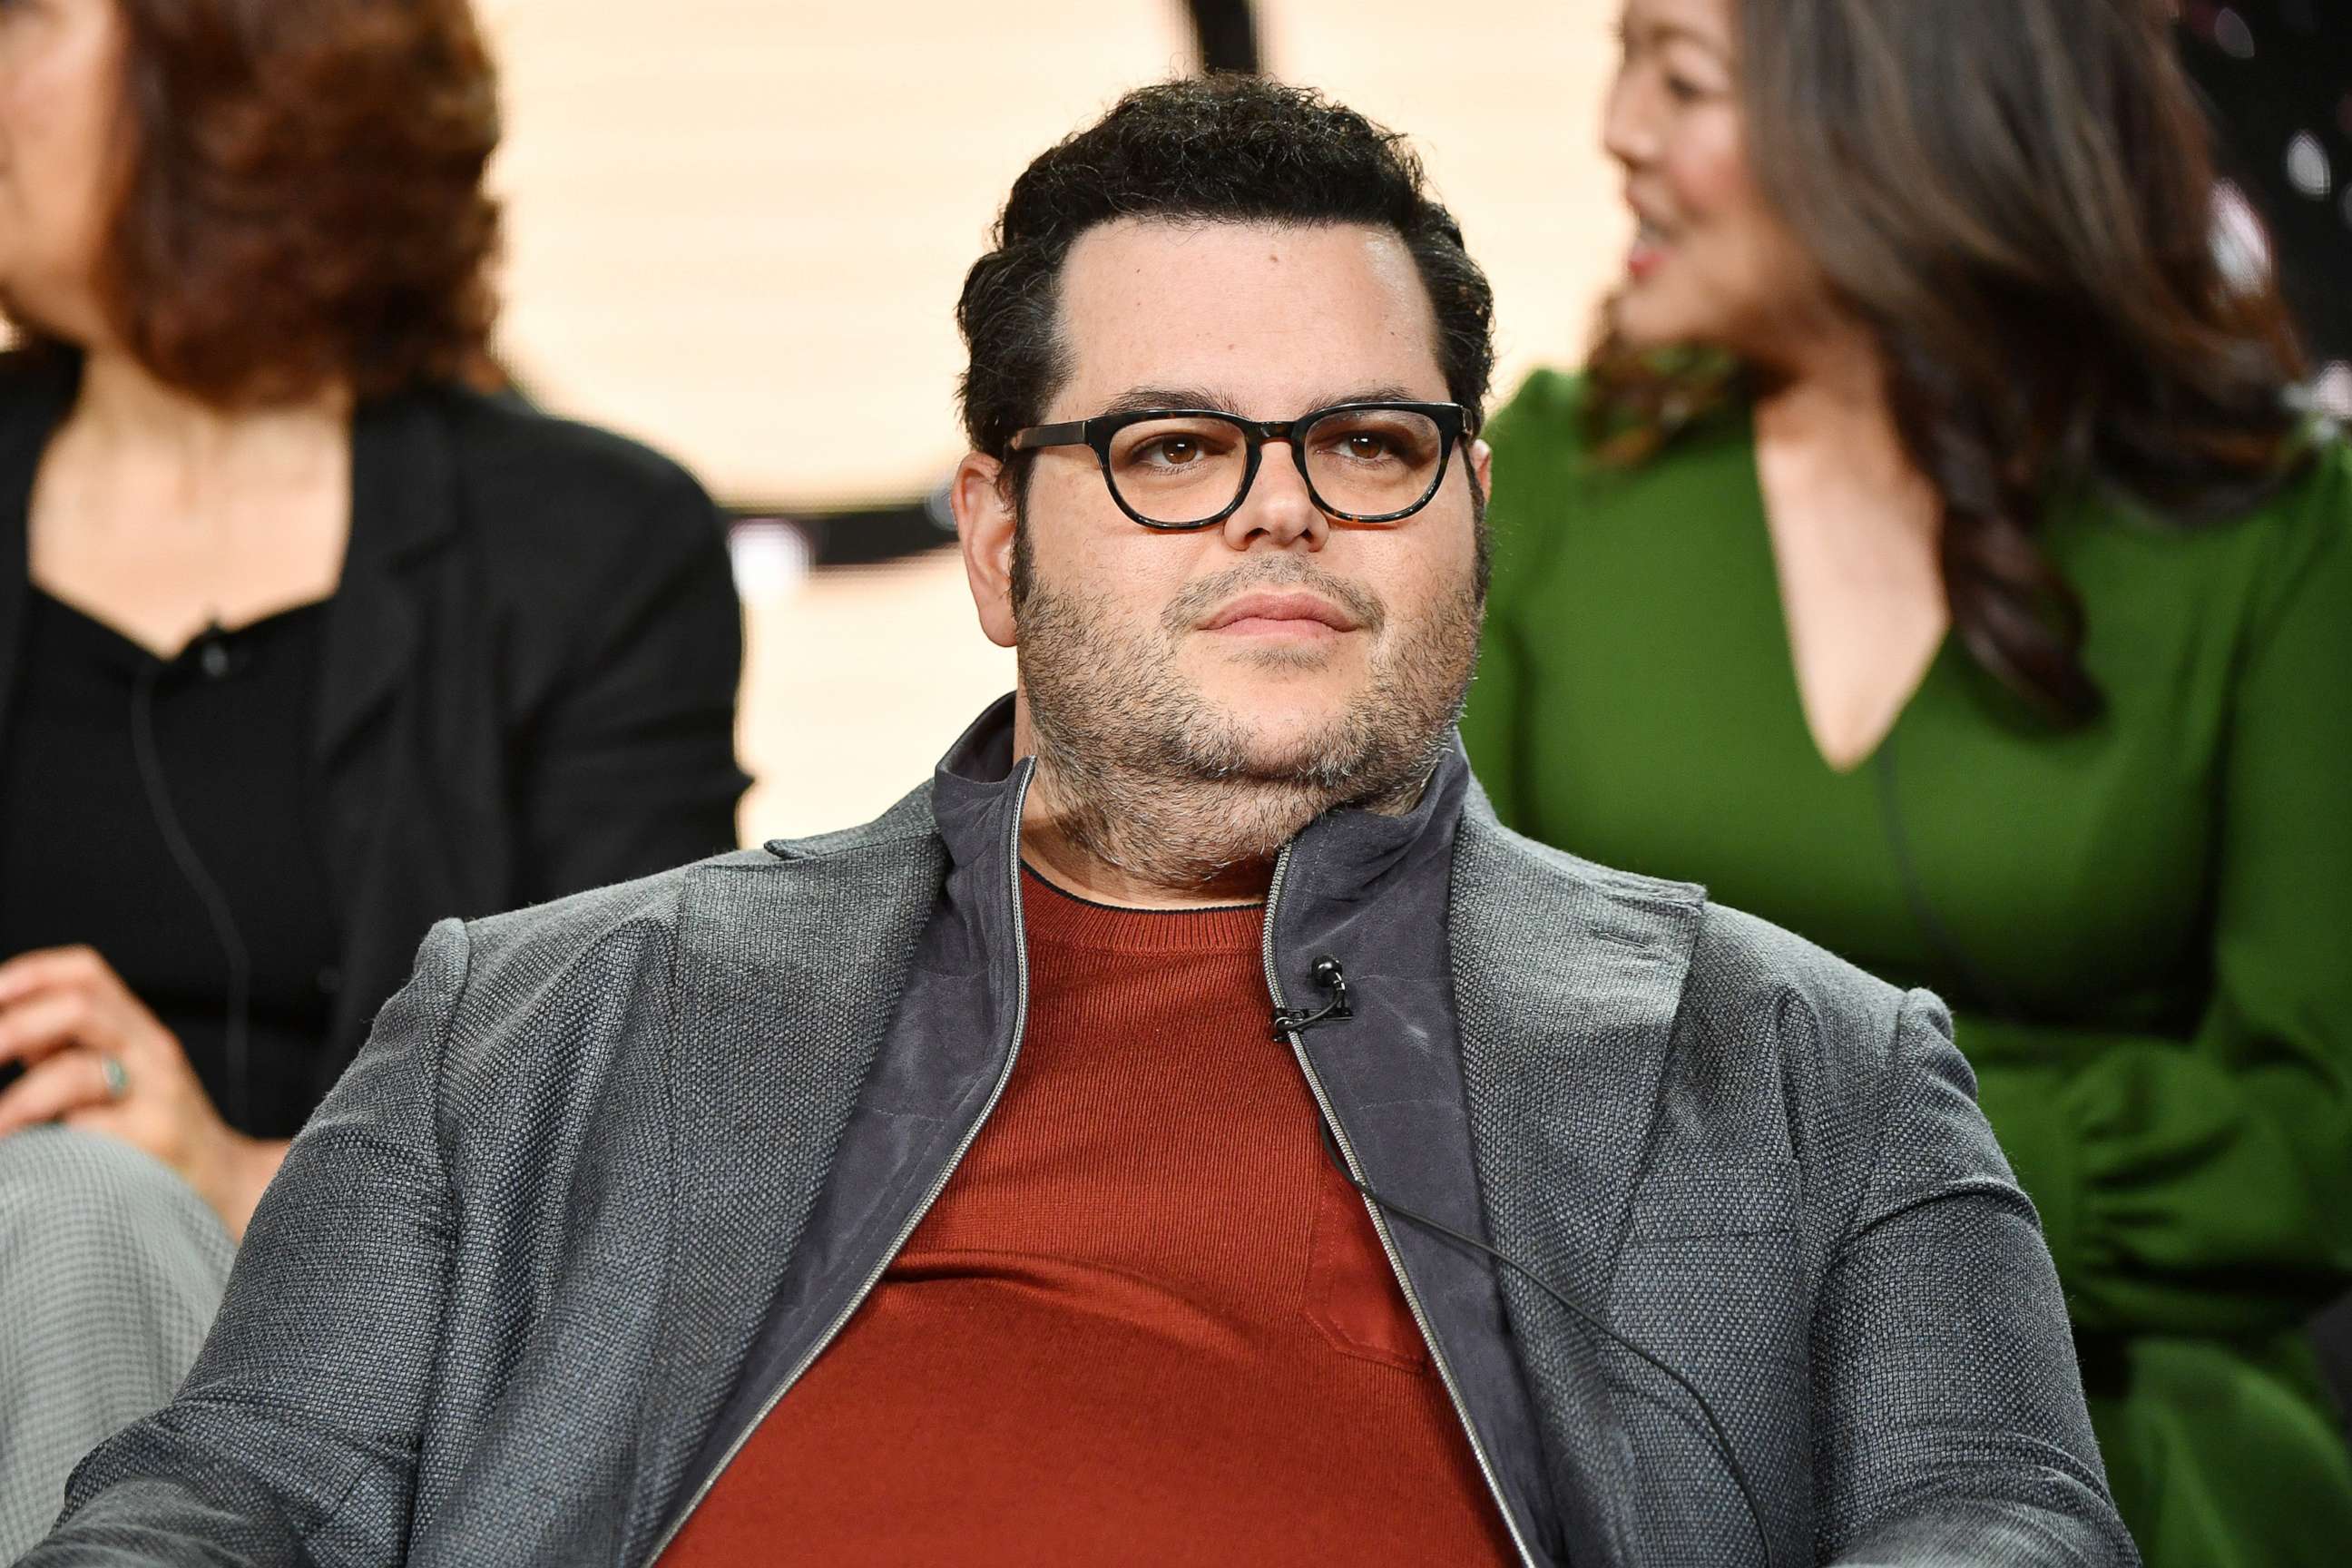 PHOTO: In this Jan. 15, 2020, file photo, Josh Gad speaks during a press event in Pasadena, Calif.